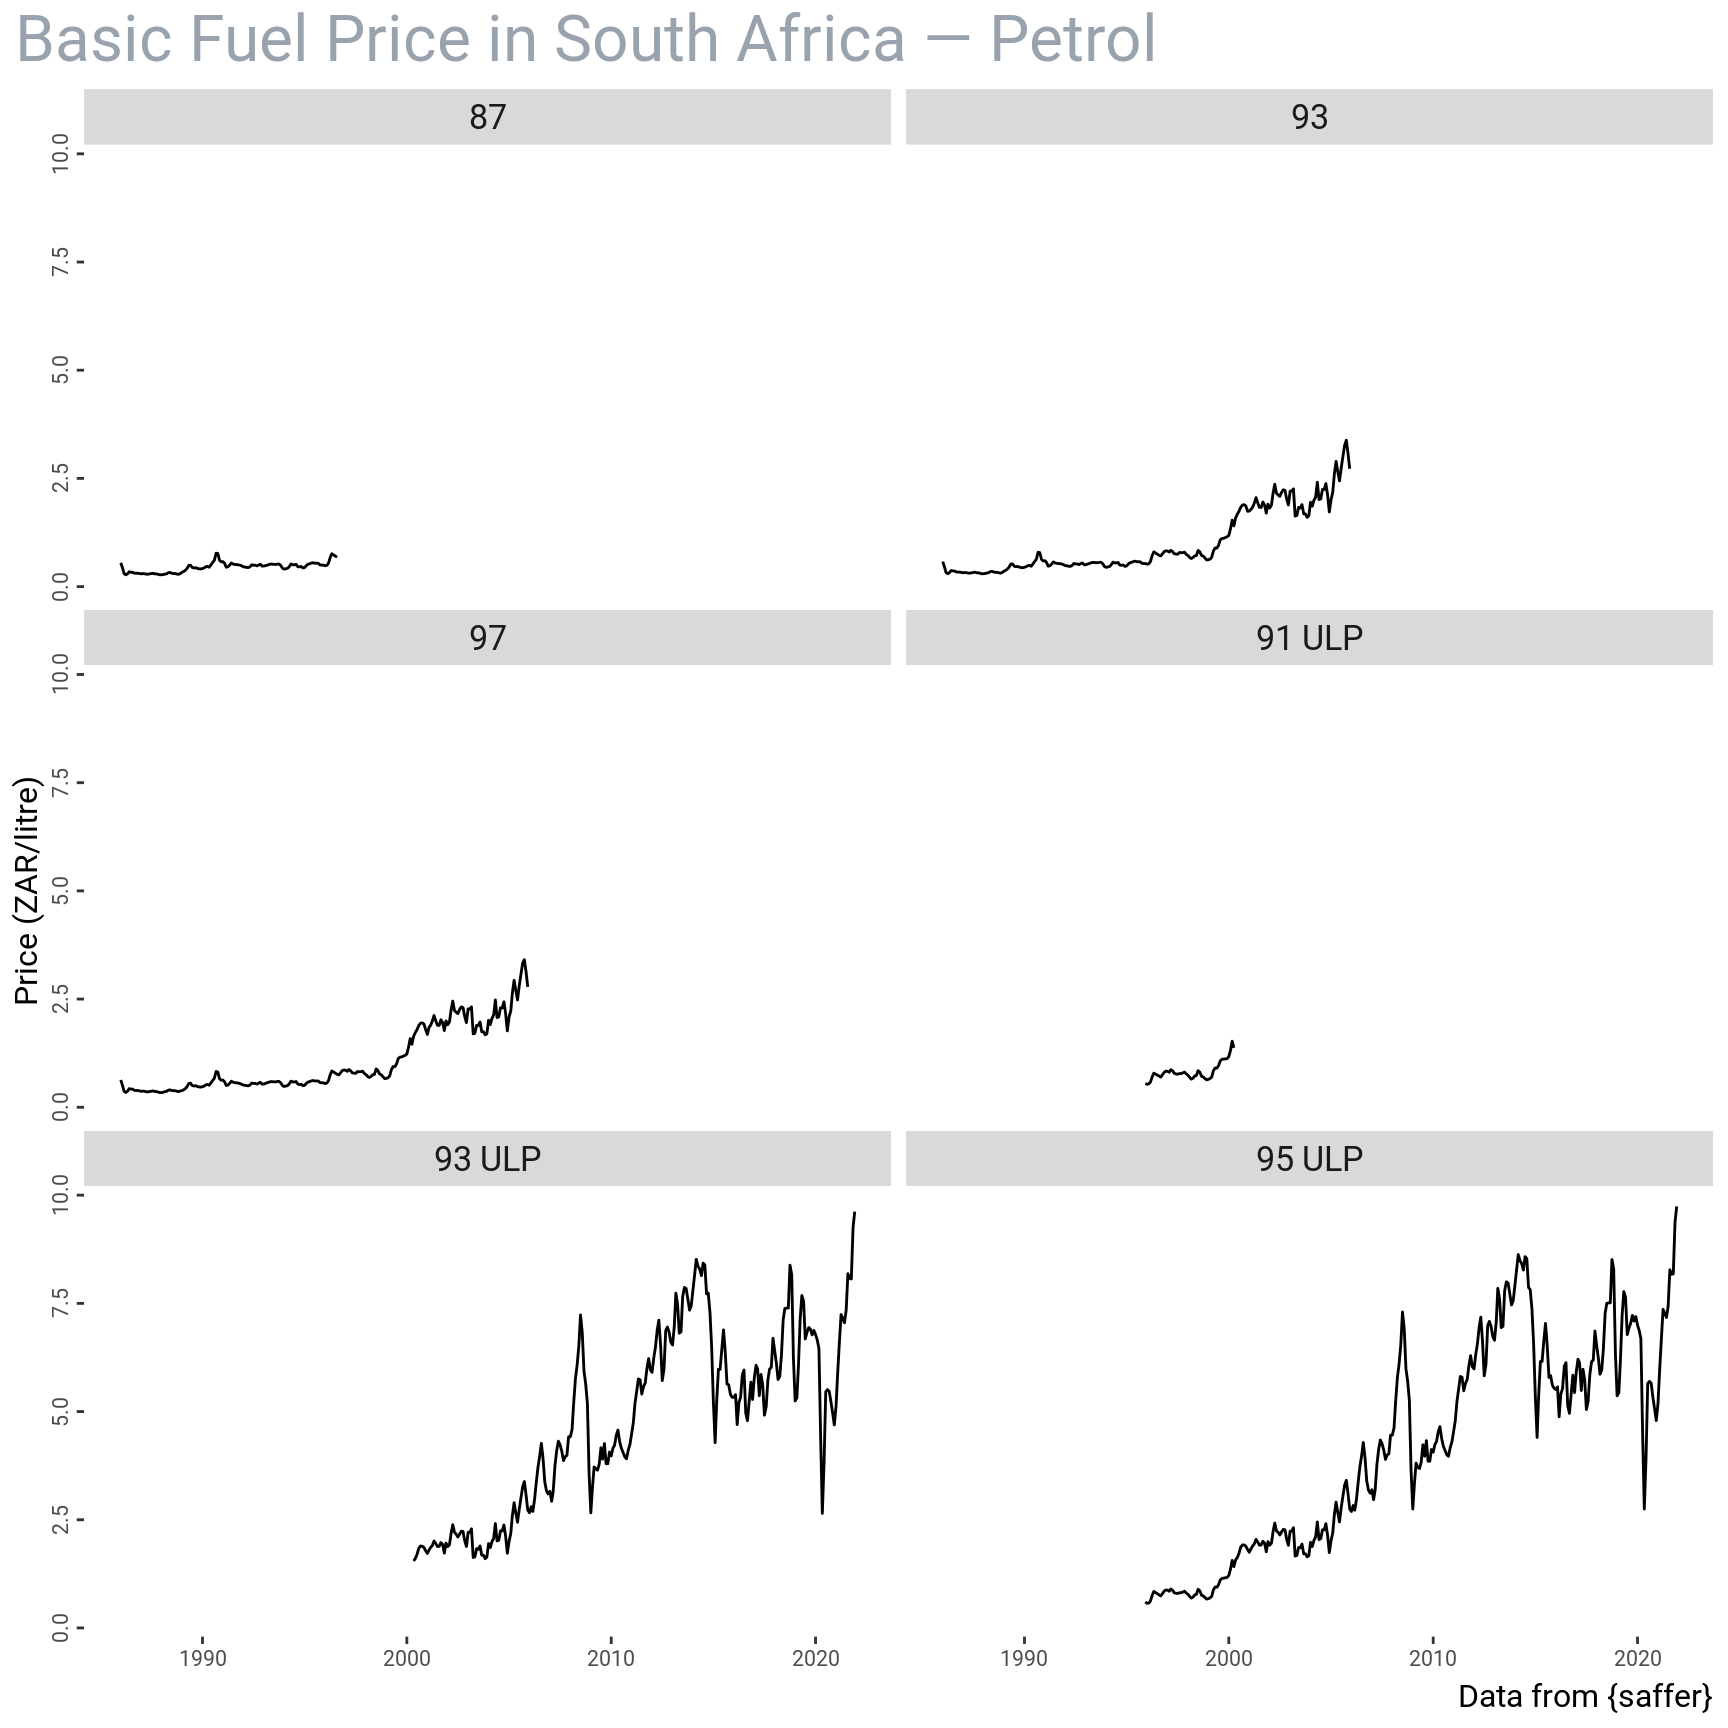 Basic fuel price for petrol versus time in South Africa.